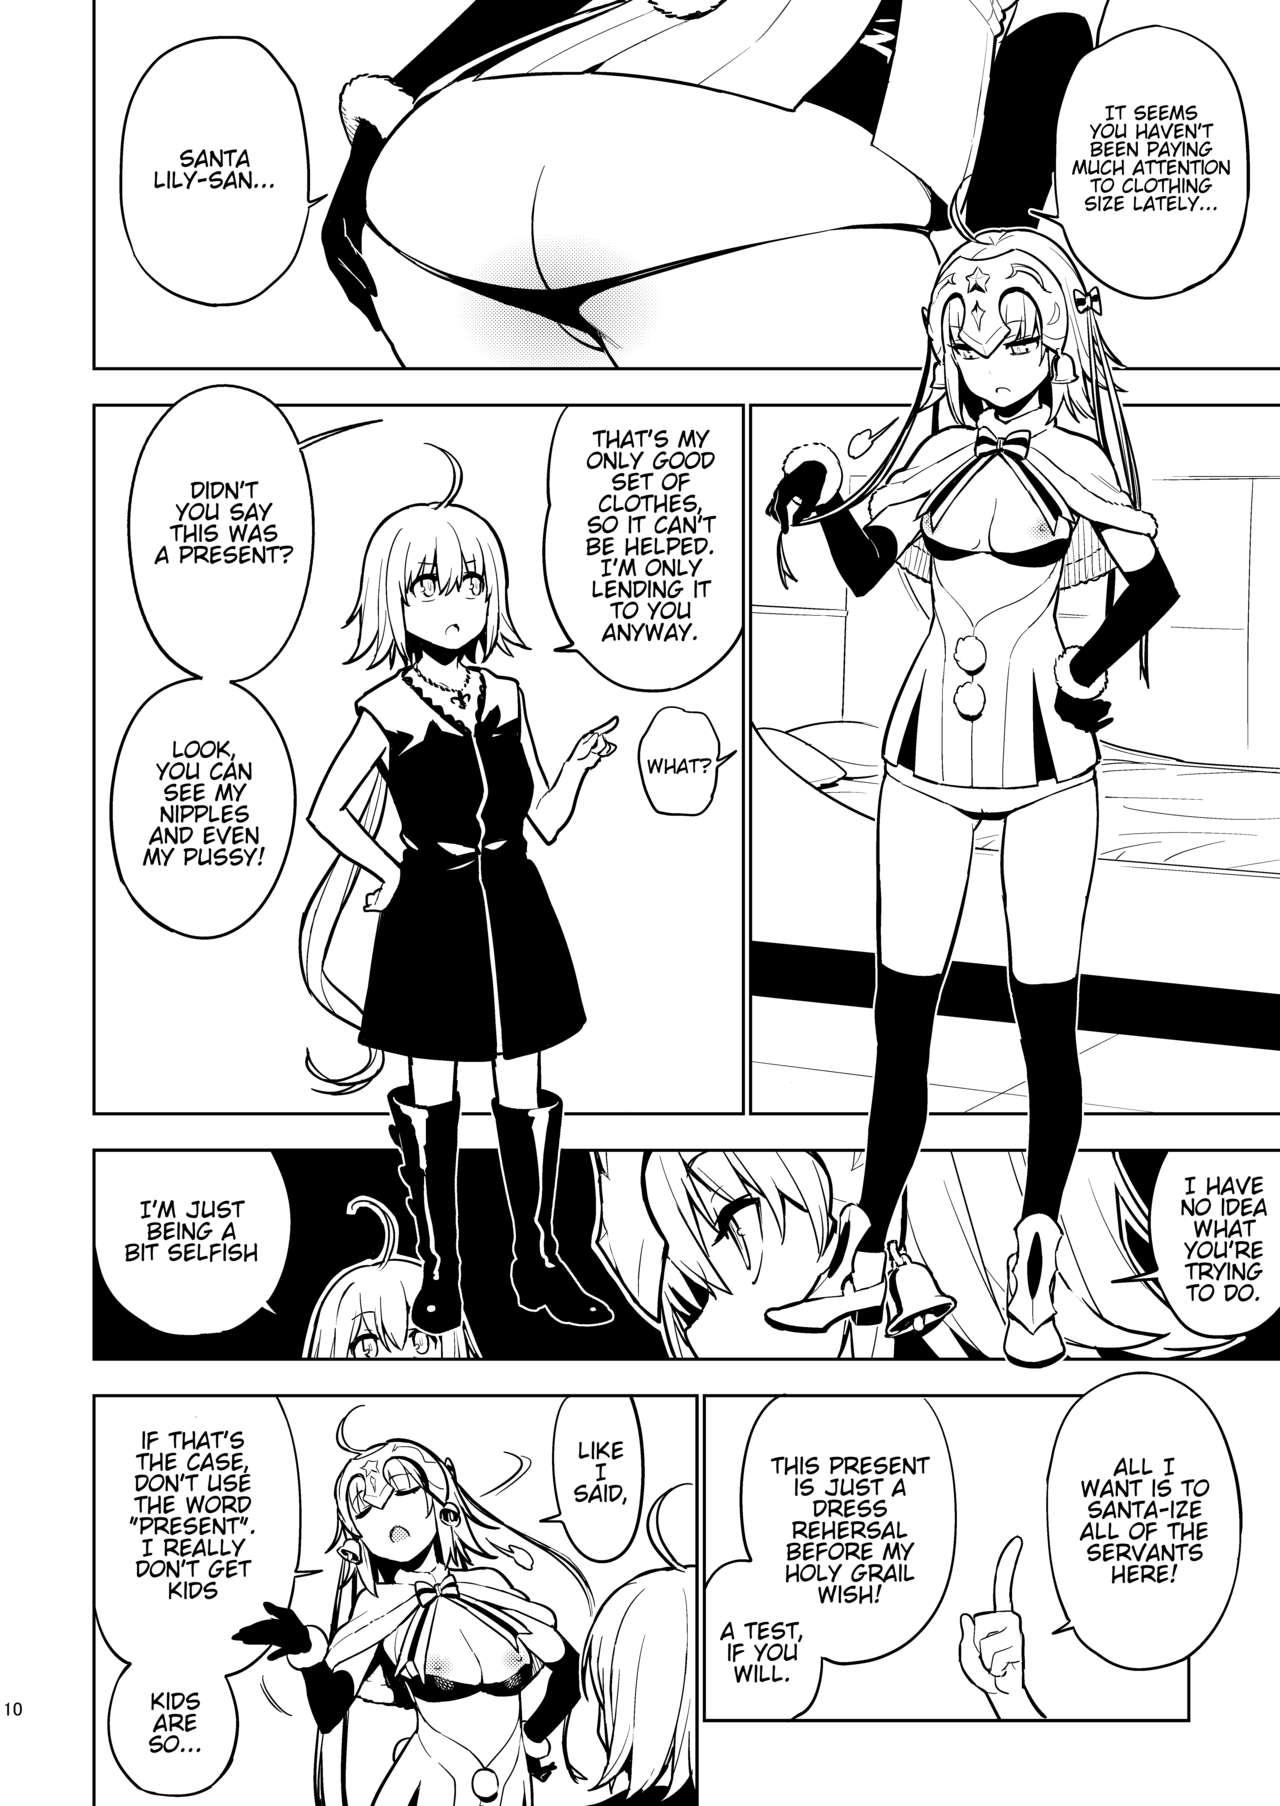 Exgf SO BORED - Fate grand order Petite Teen - Page 8